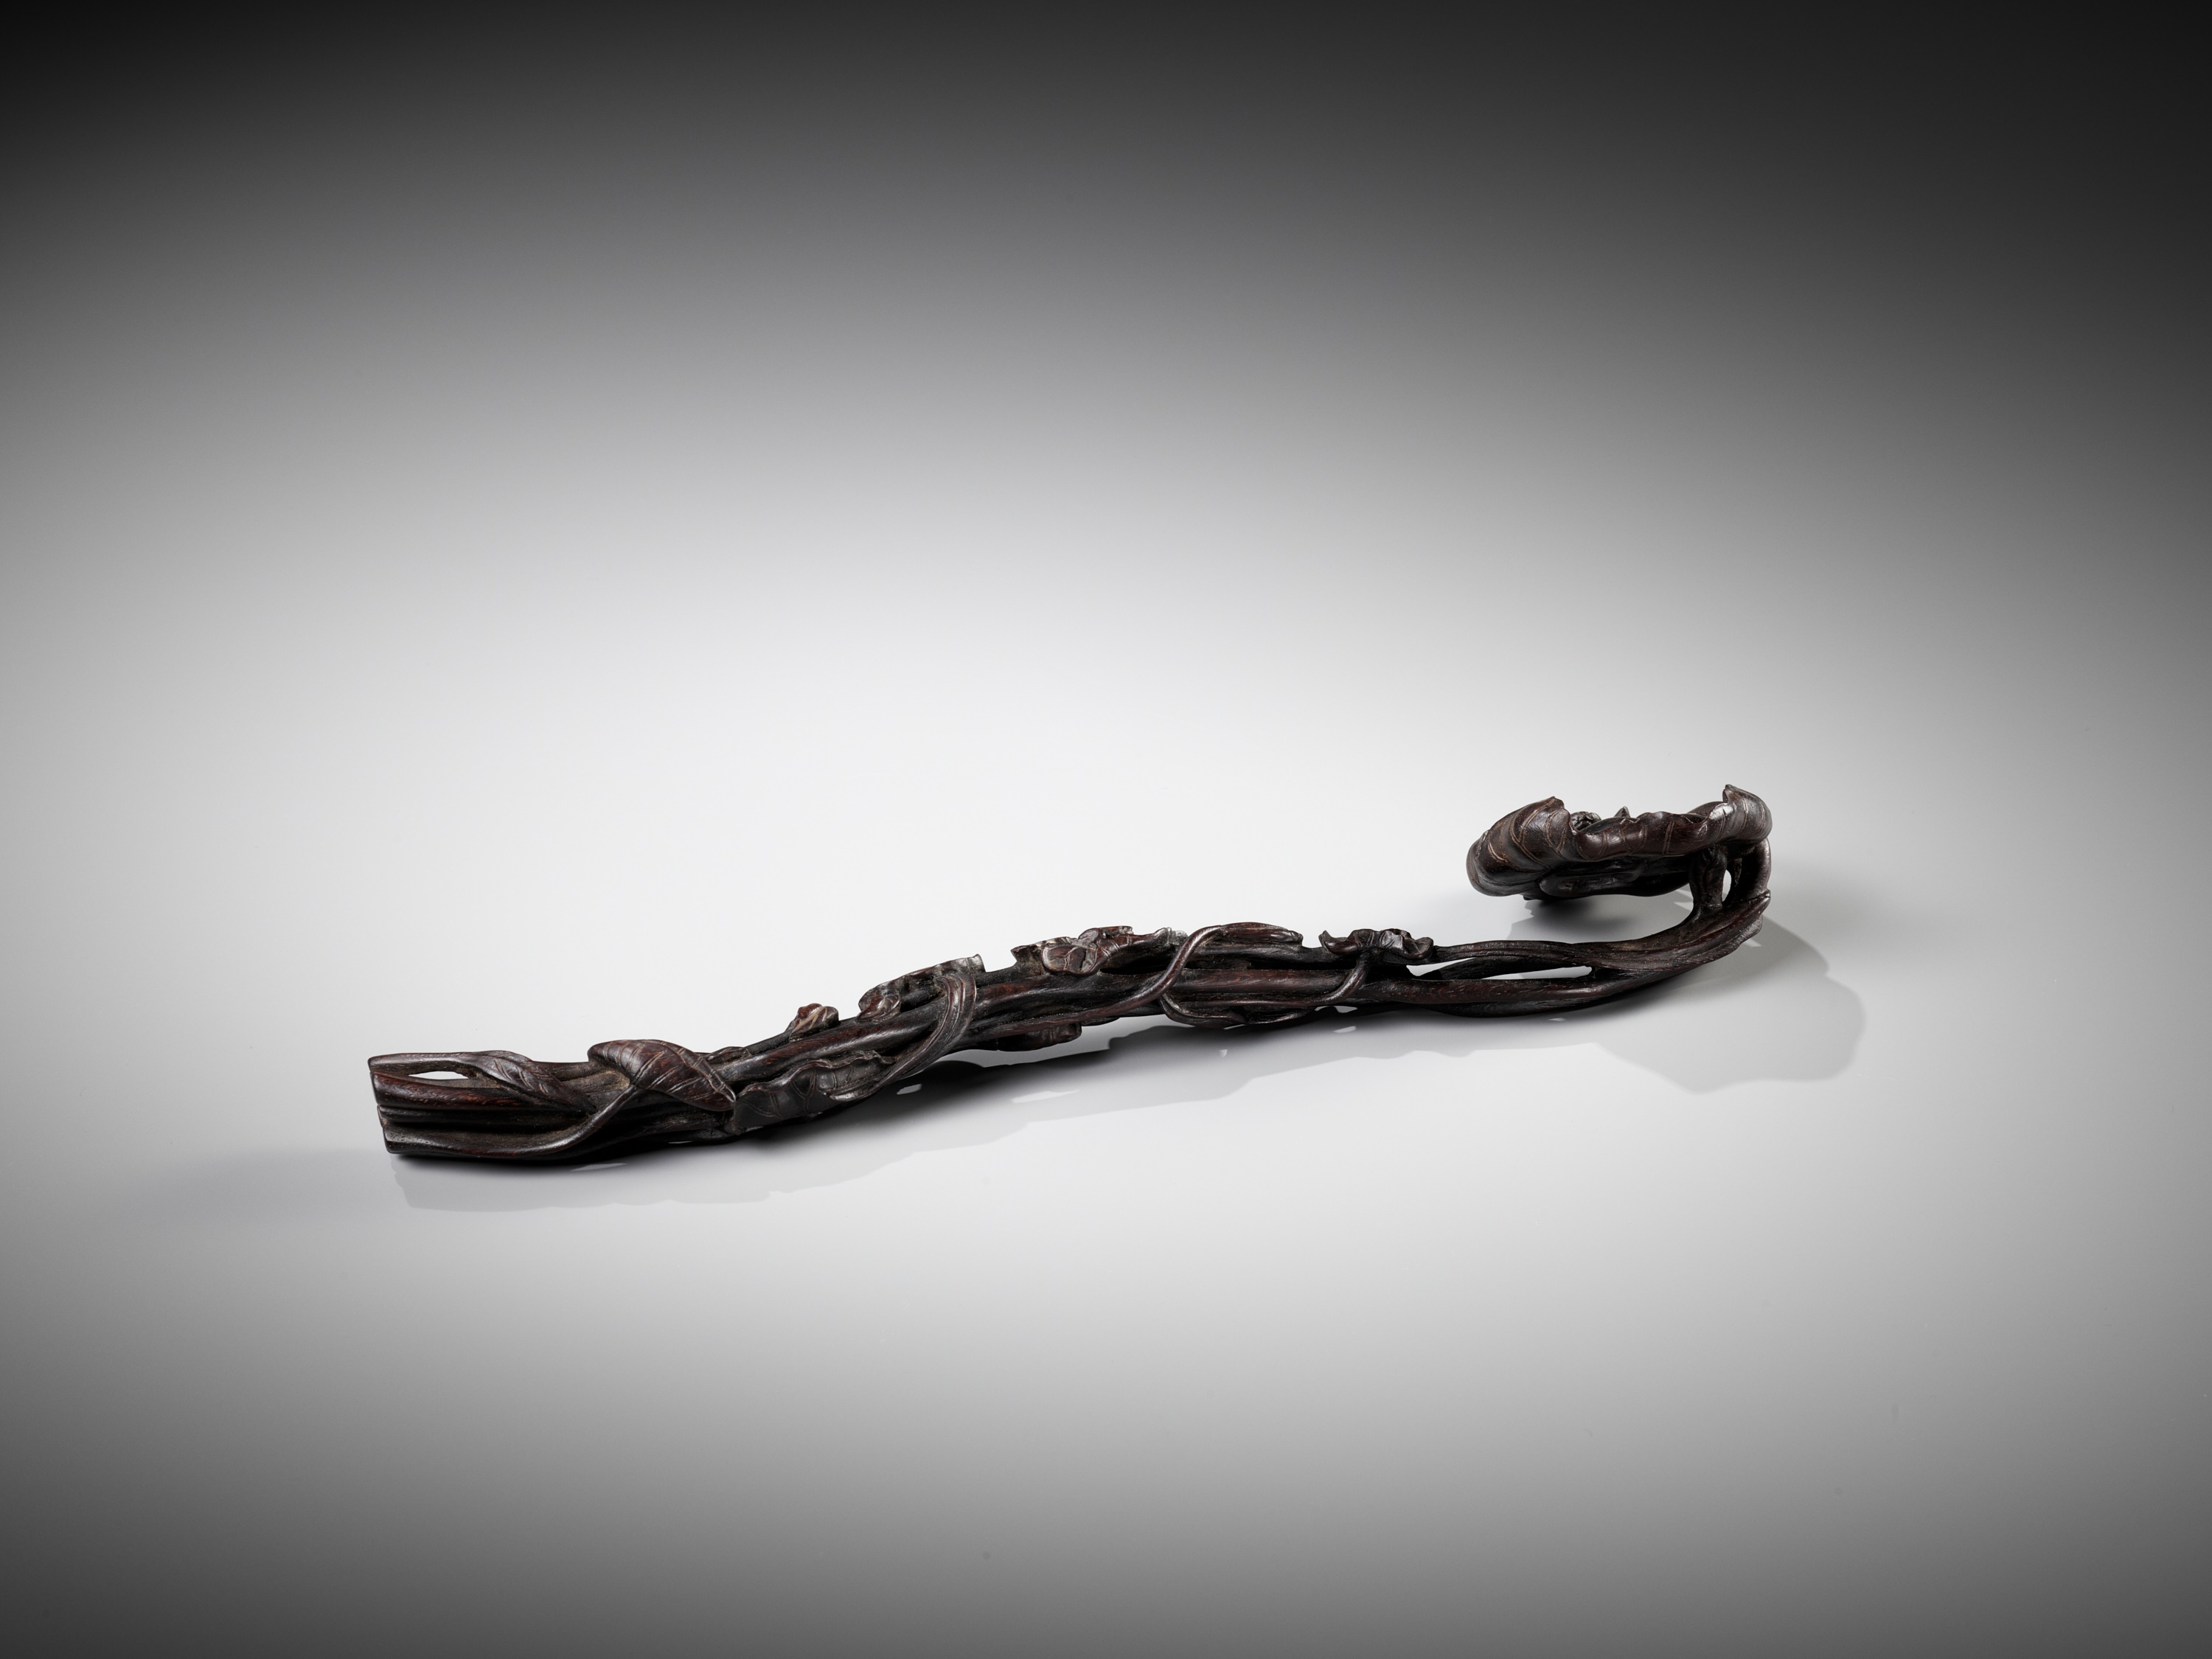 A ZITAN WOOD 'LOTUS' RUYI SCEPTER, PROBABLY IMPERIAL - Image 10 of 12